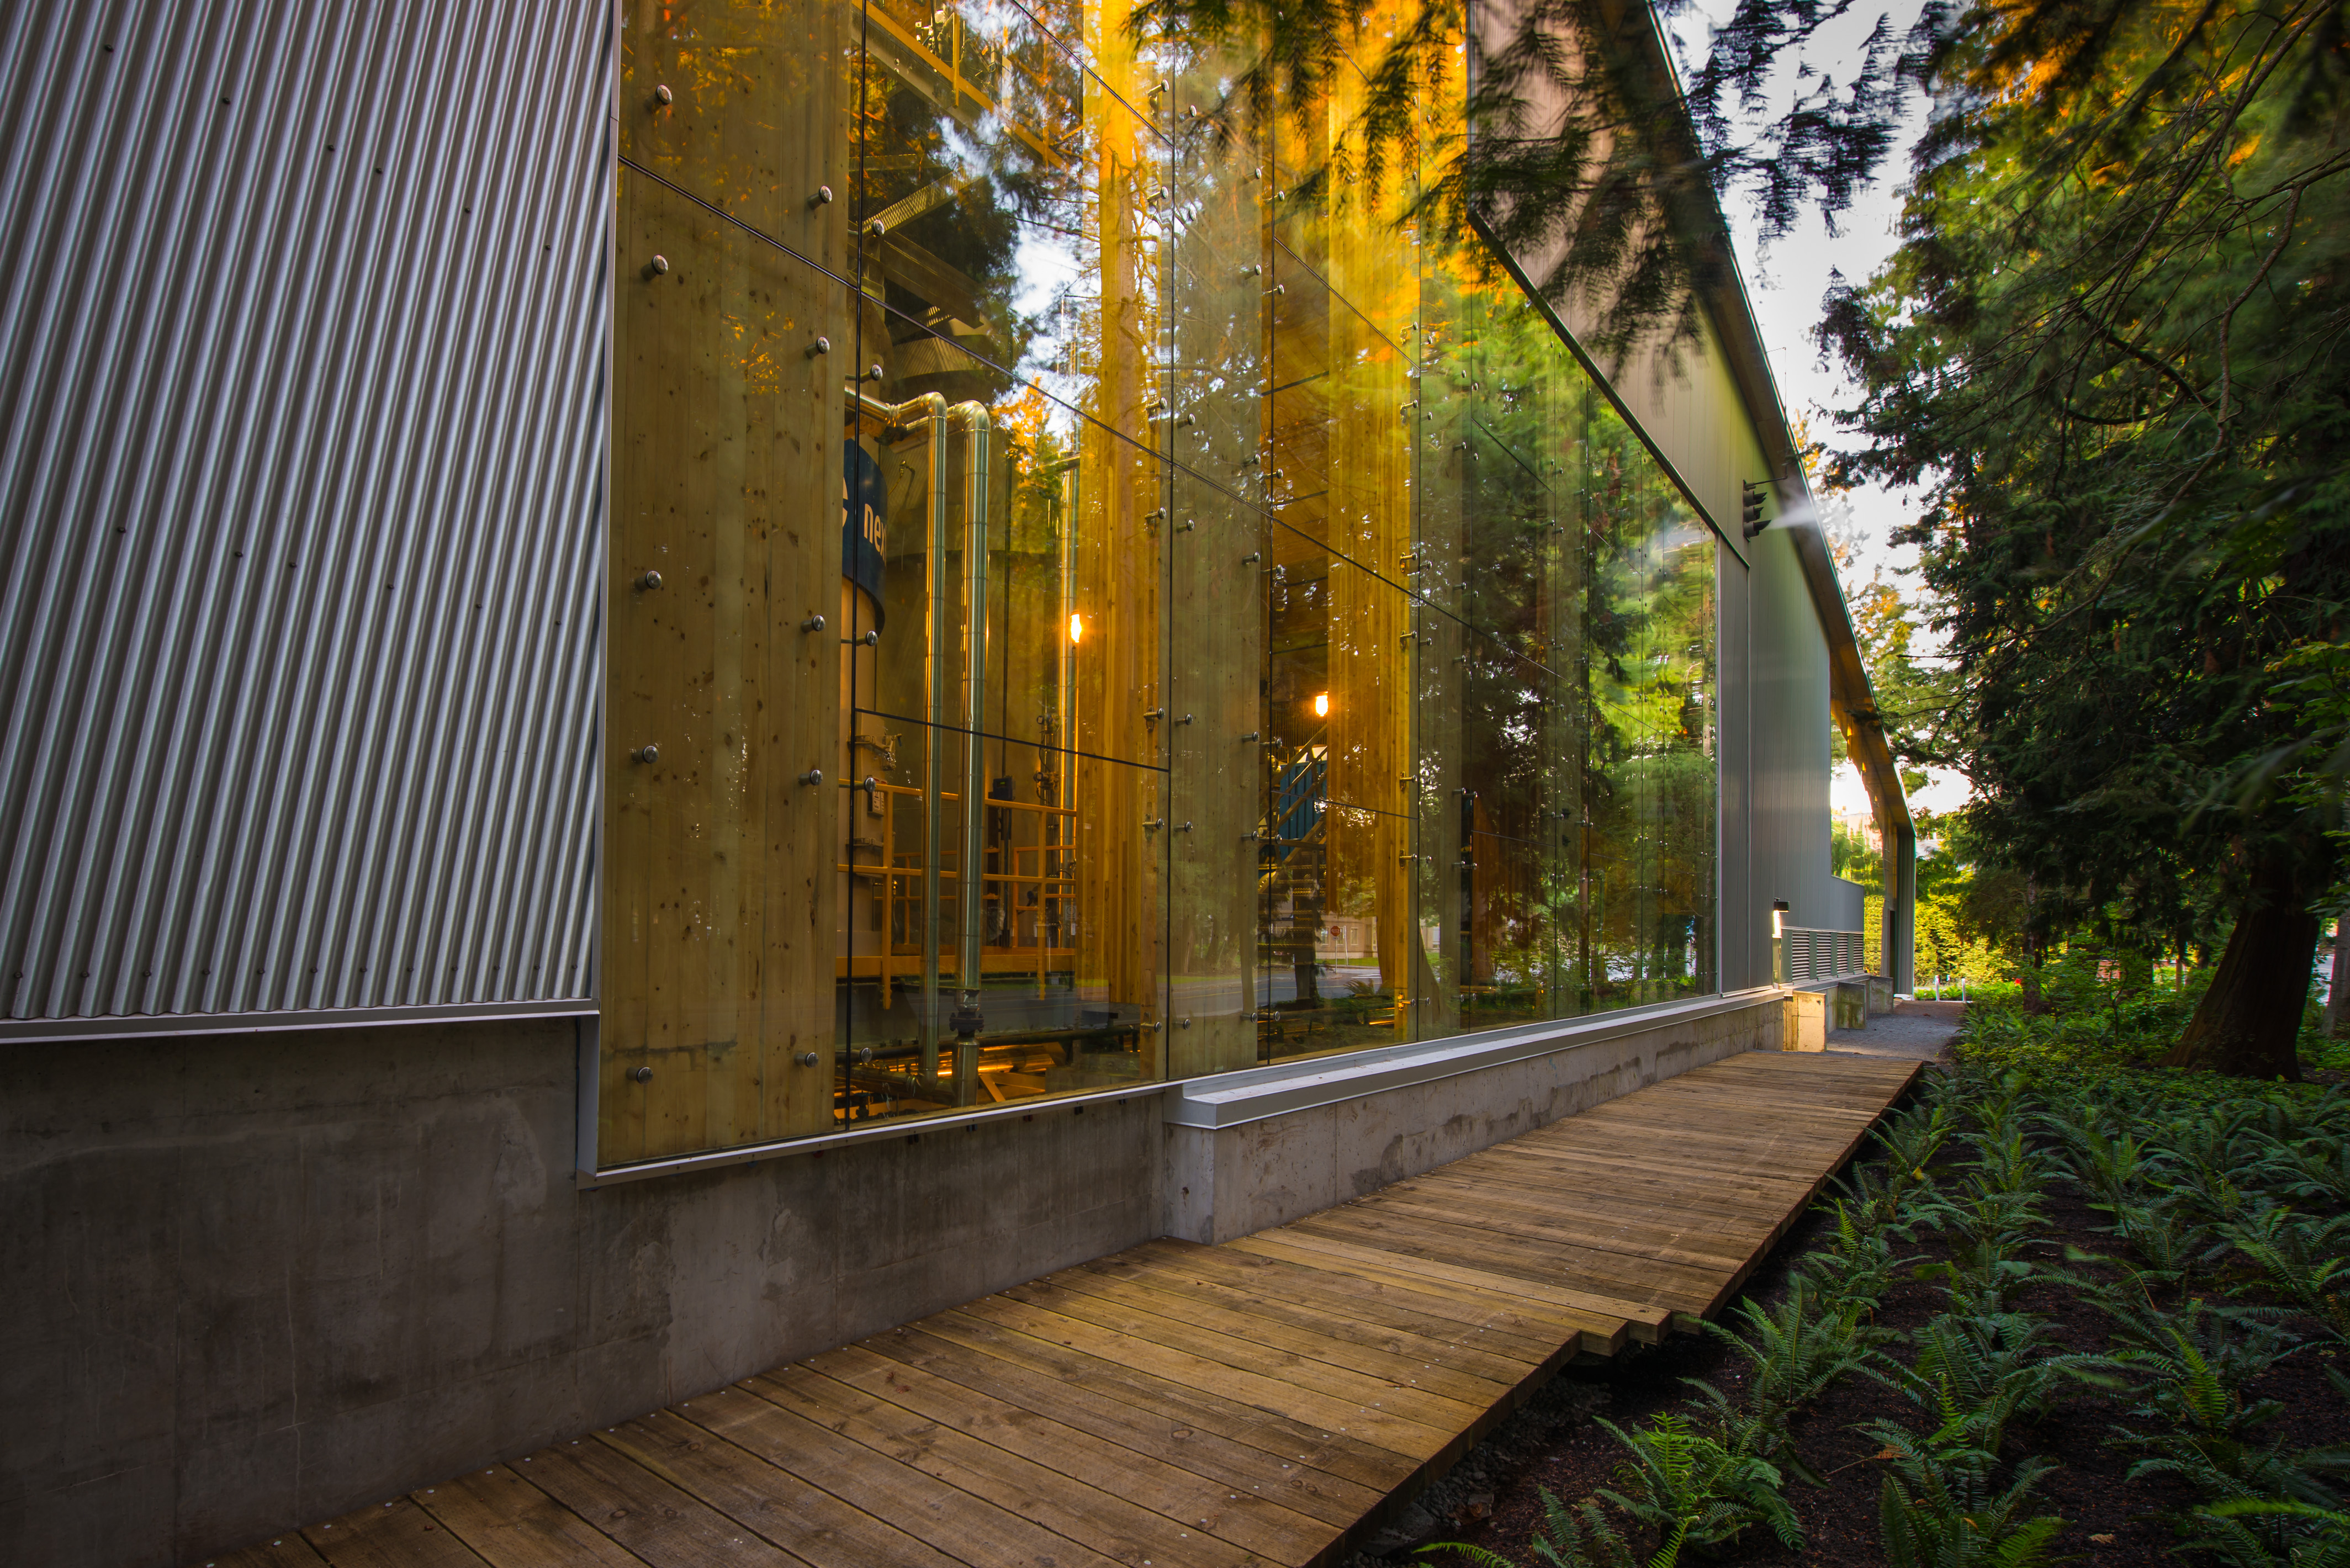 UBC's Bioenergy Research & Demonstration Facility uses cross-laminated timber throughout the building. Photo by Don Erhardt